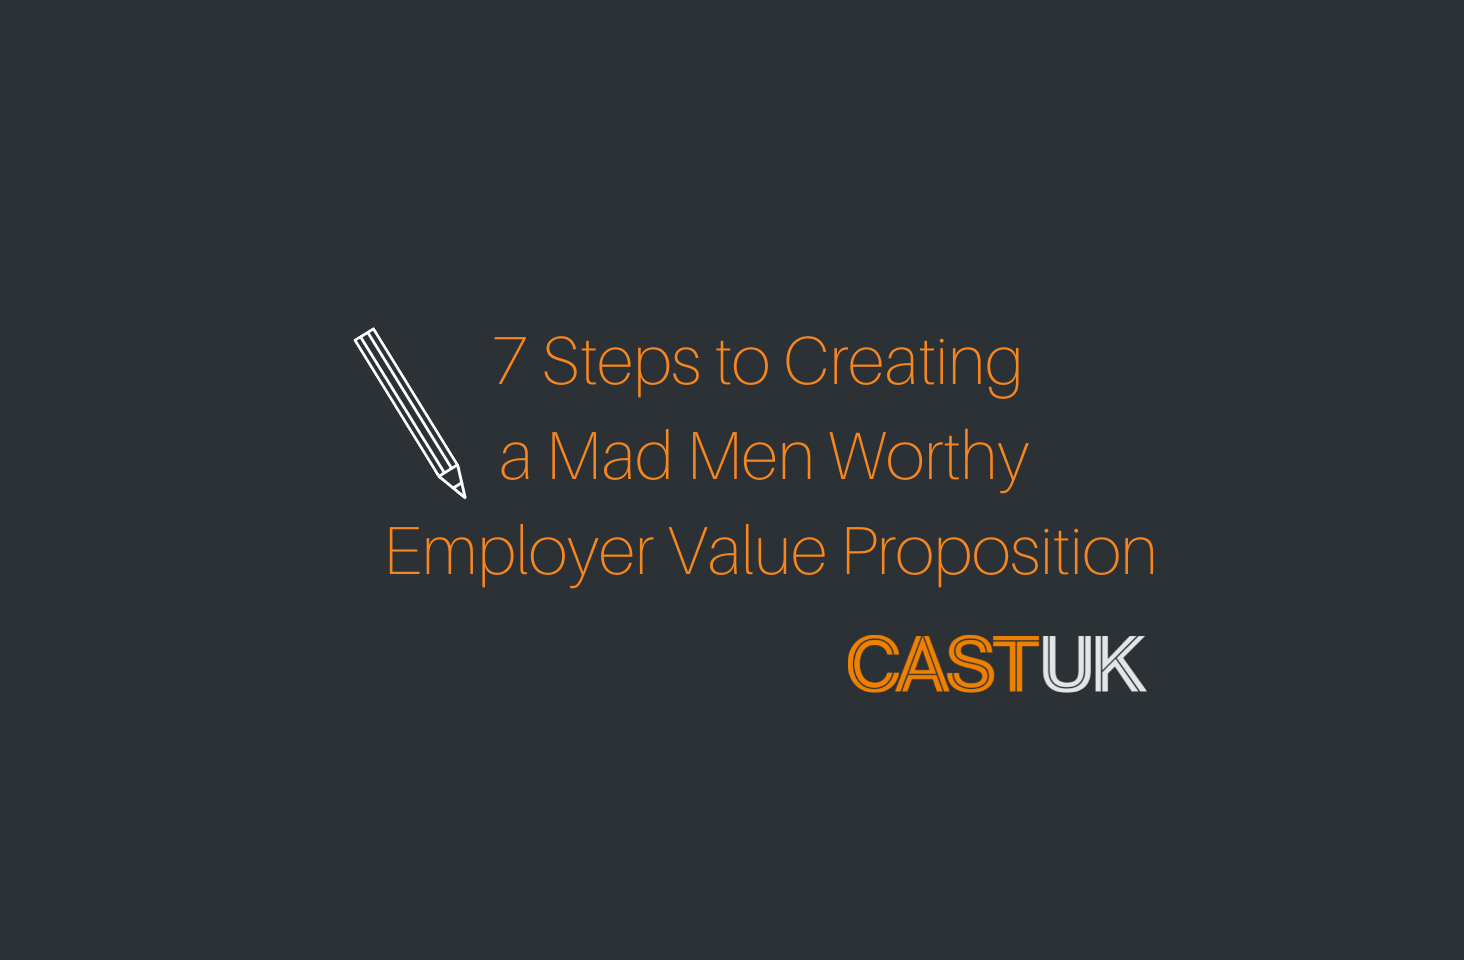 7 Steps to Creating a Mad Men Worthy Employer Value Proposition